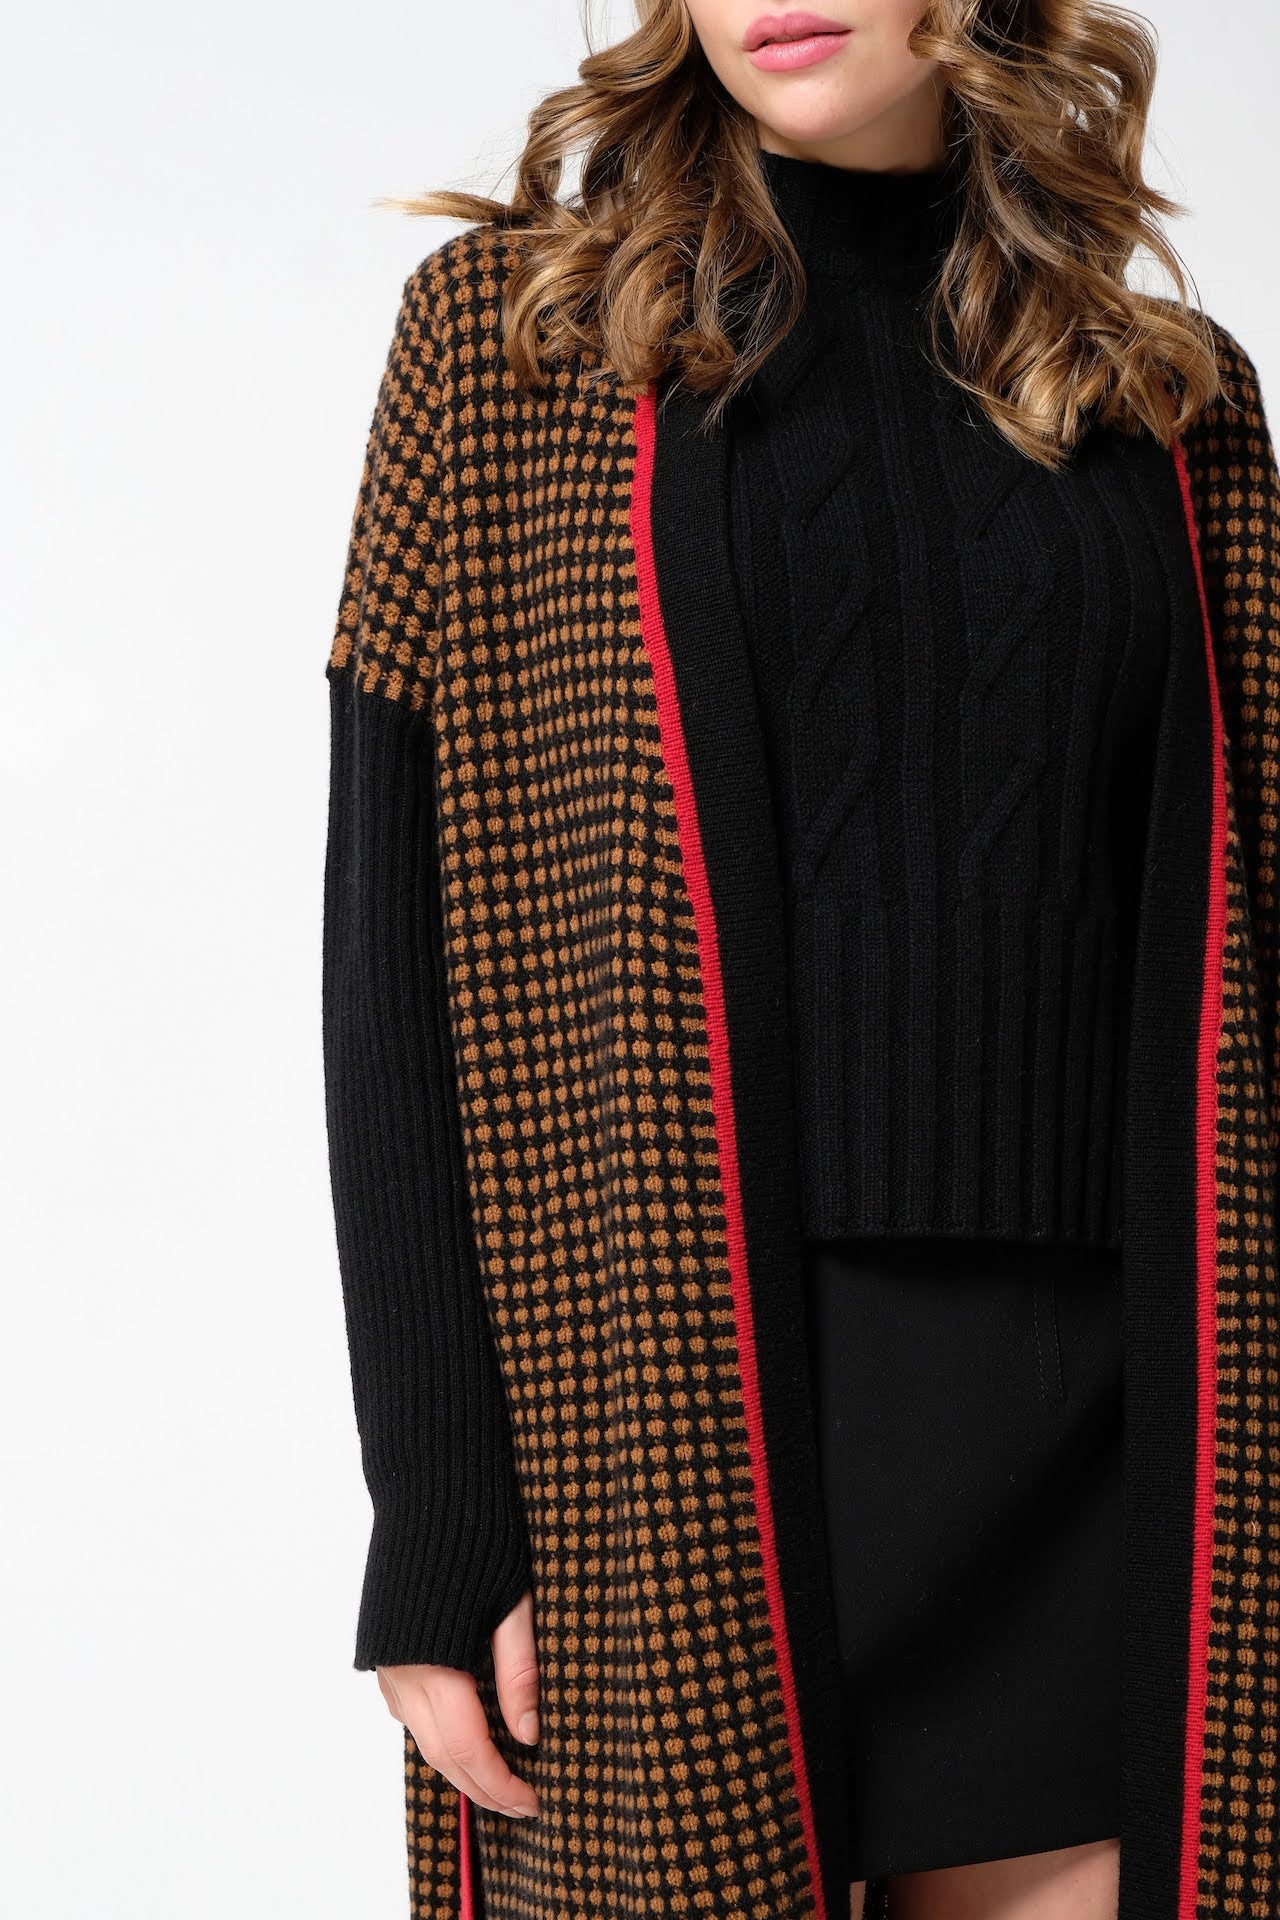 WOOL AND CASHMERE COAT in black, camel and red